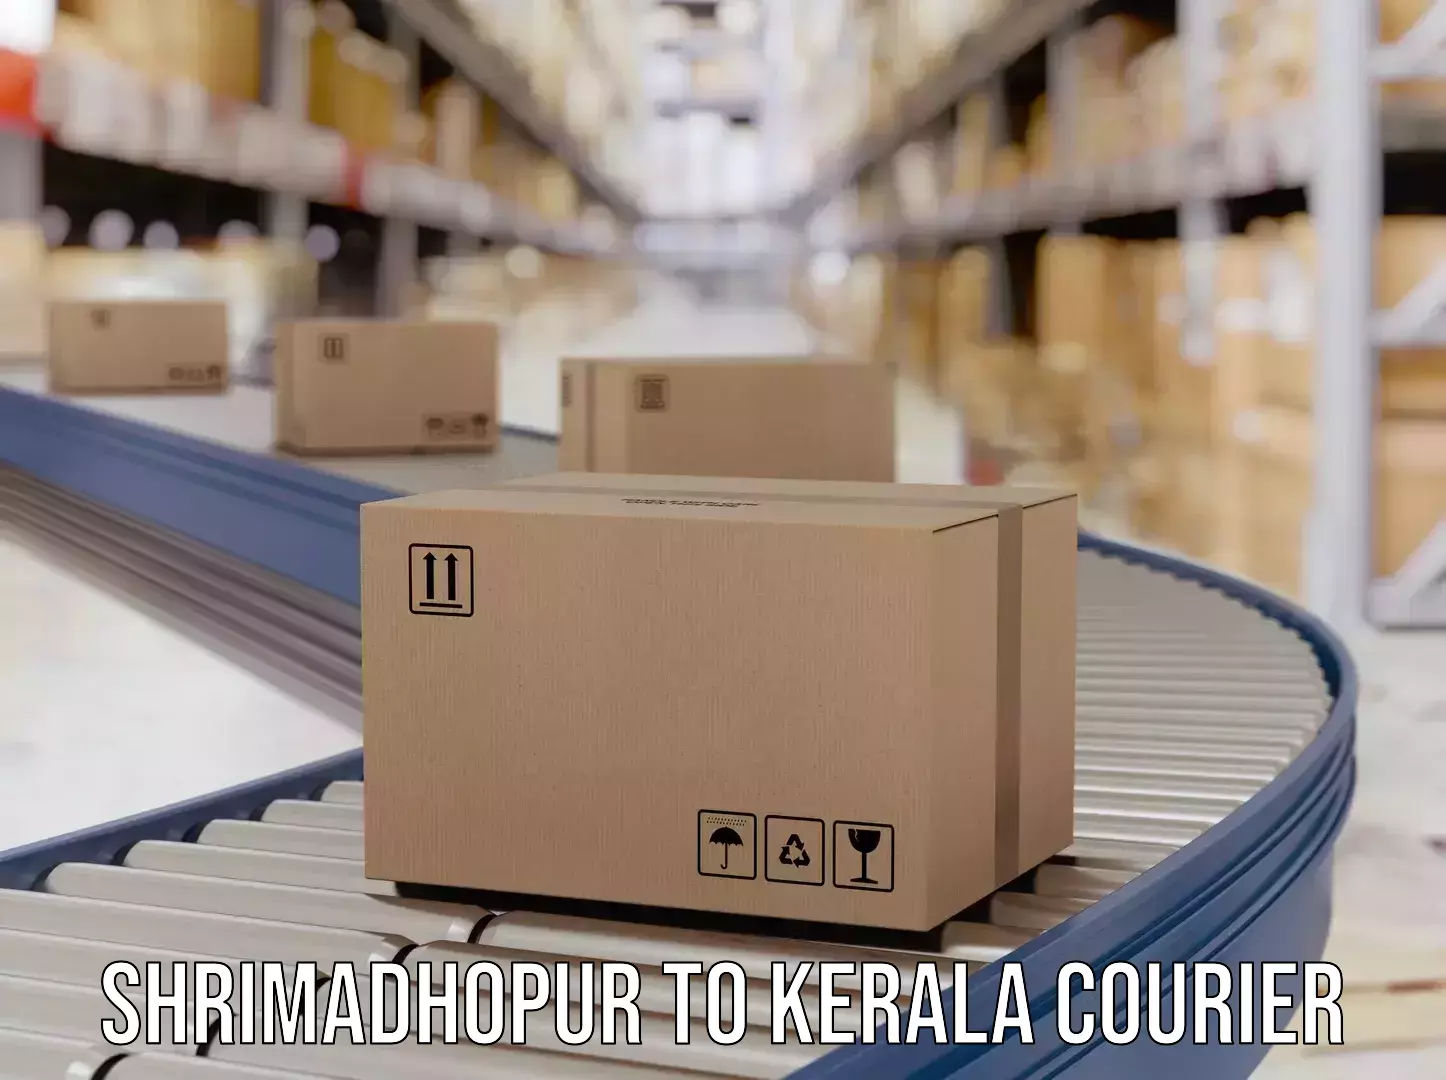 Weekend courier service Shrimadhopur to Perumbavoor